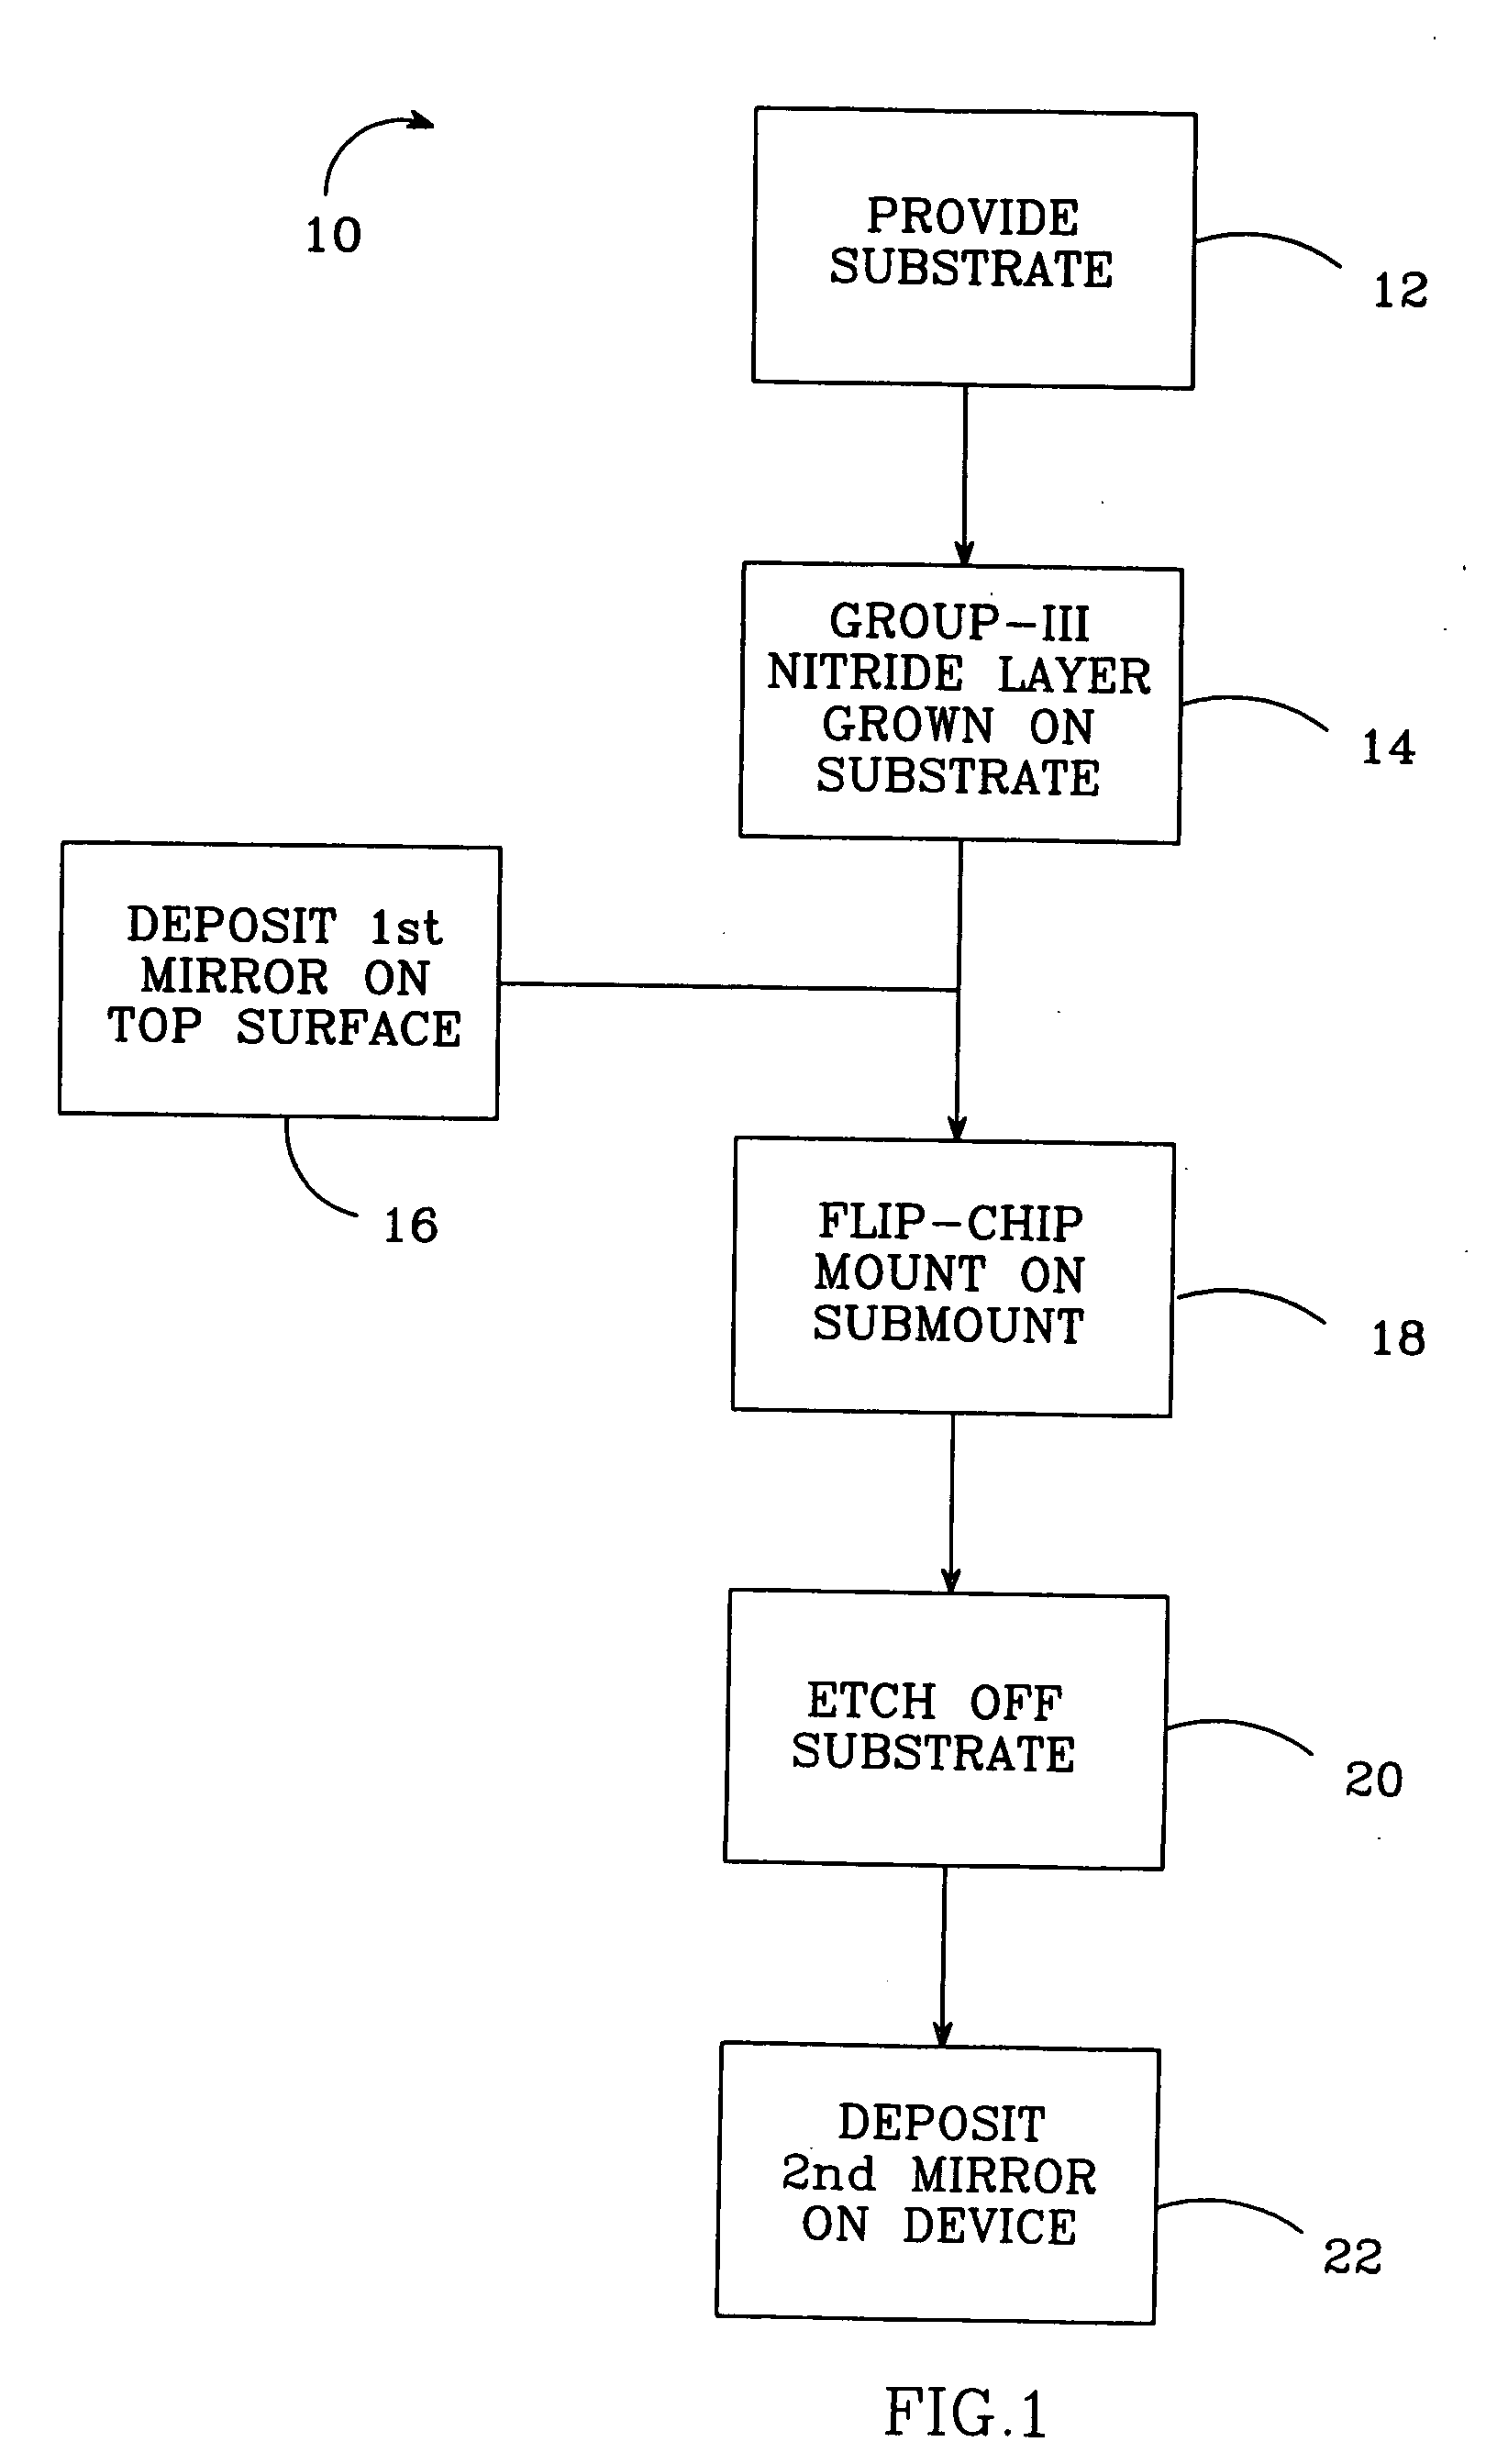 Method for fabricating group-III nitride devices and devices fabricated using method